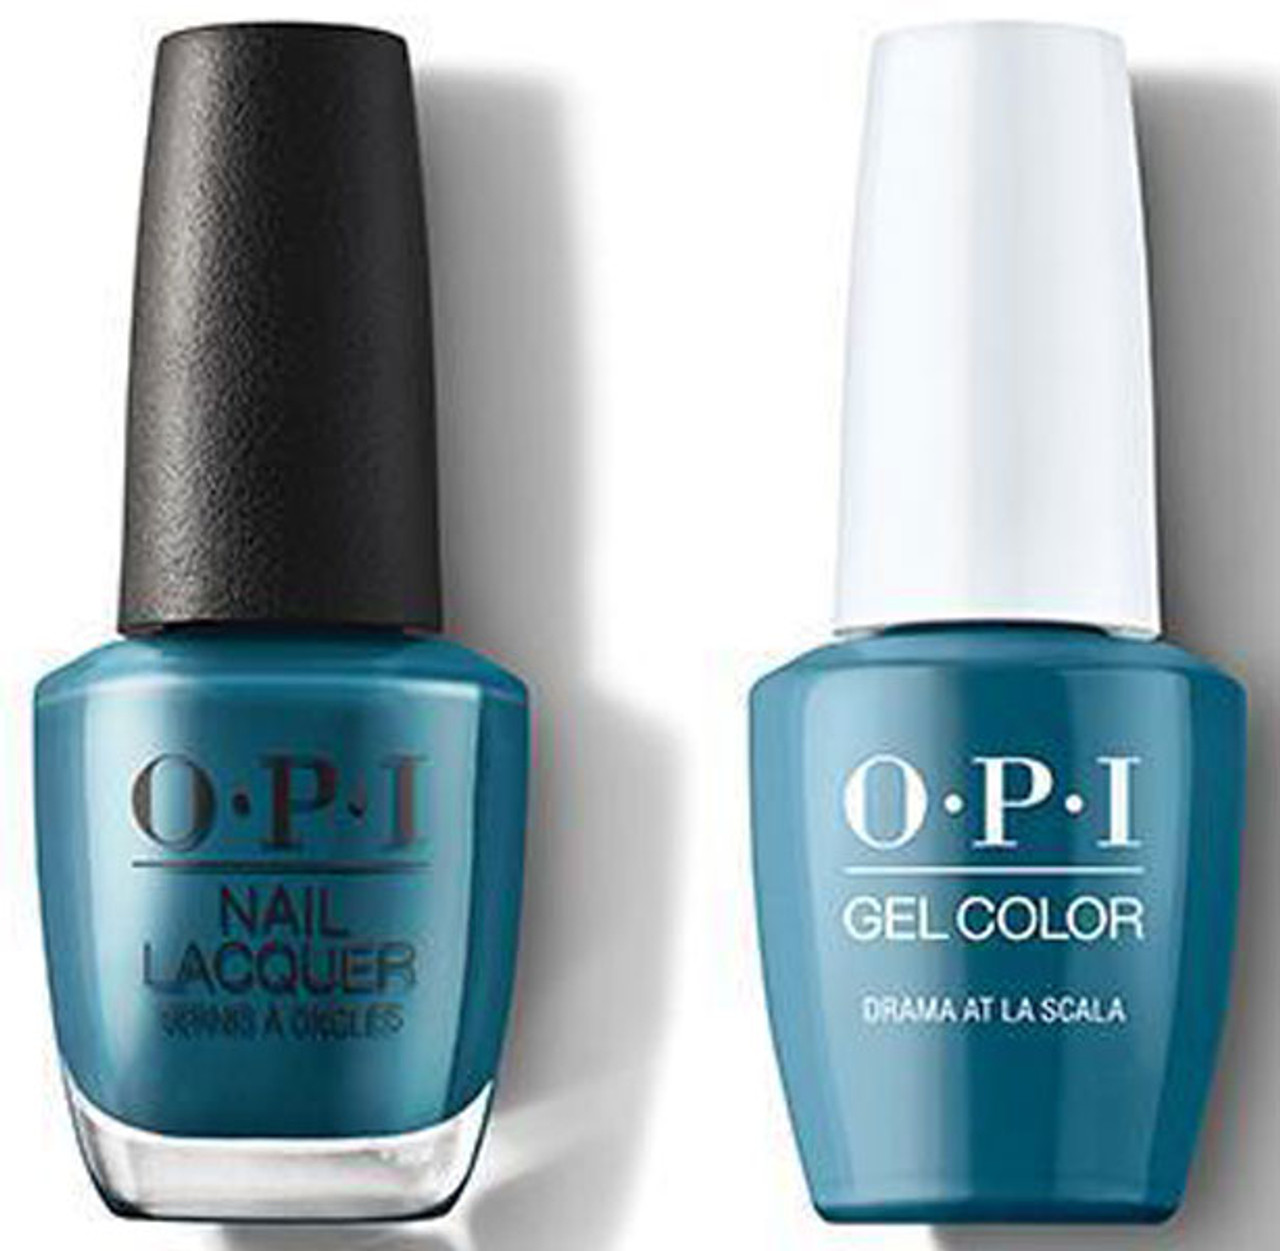 OPI DUO GelColor + Matching Classic Nail Lacquer Drama at La Scala